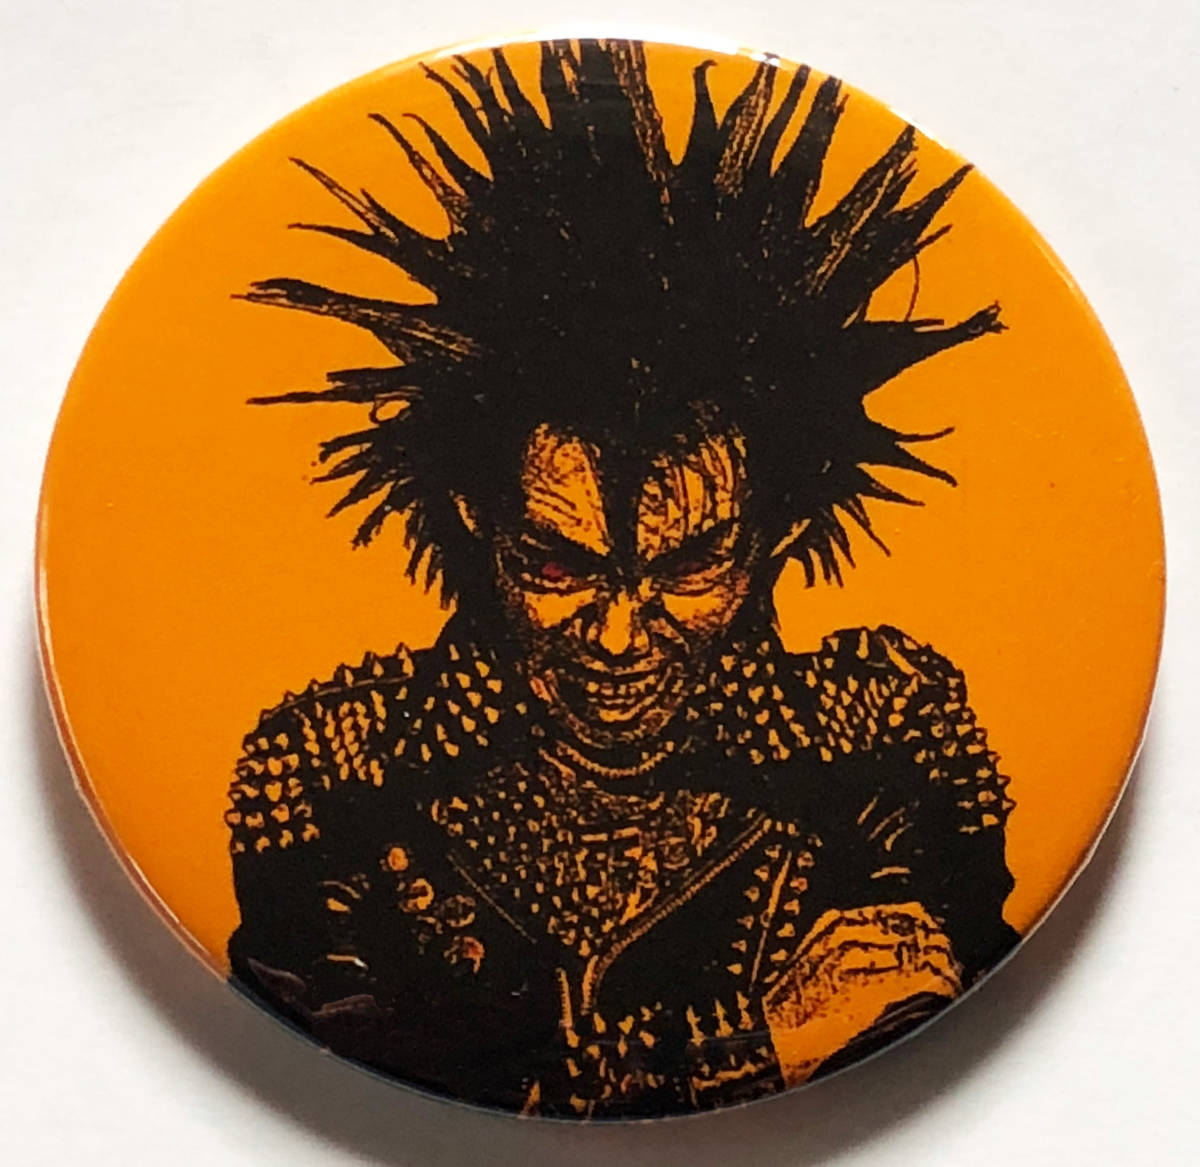 GREAT PUNK HITS 缶バッジ 54mm #japanese #punk #80's cult killer punk rock #custom buttonsの画像1